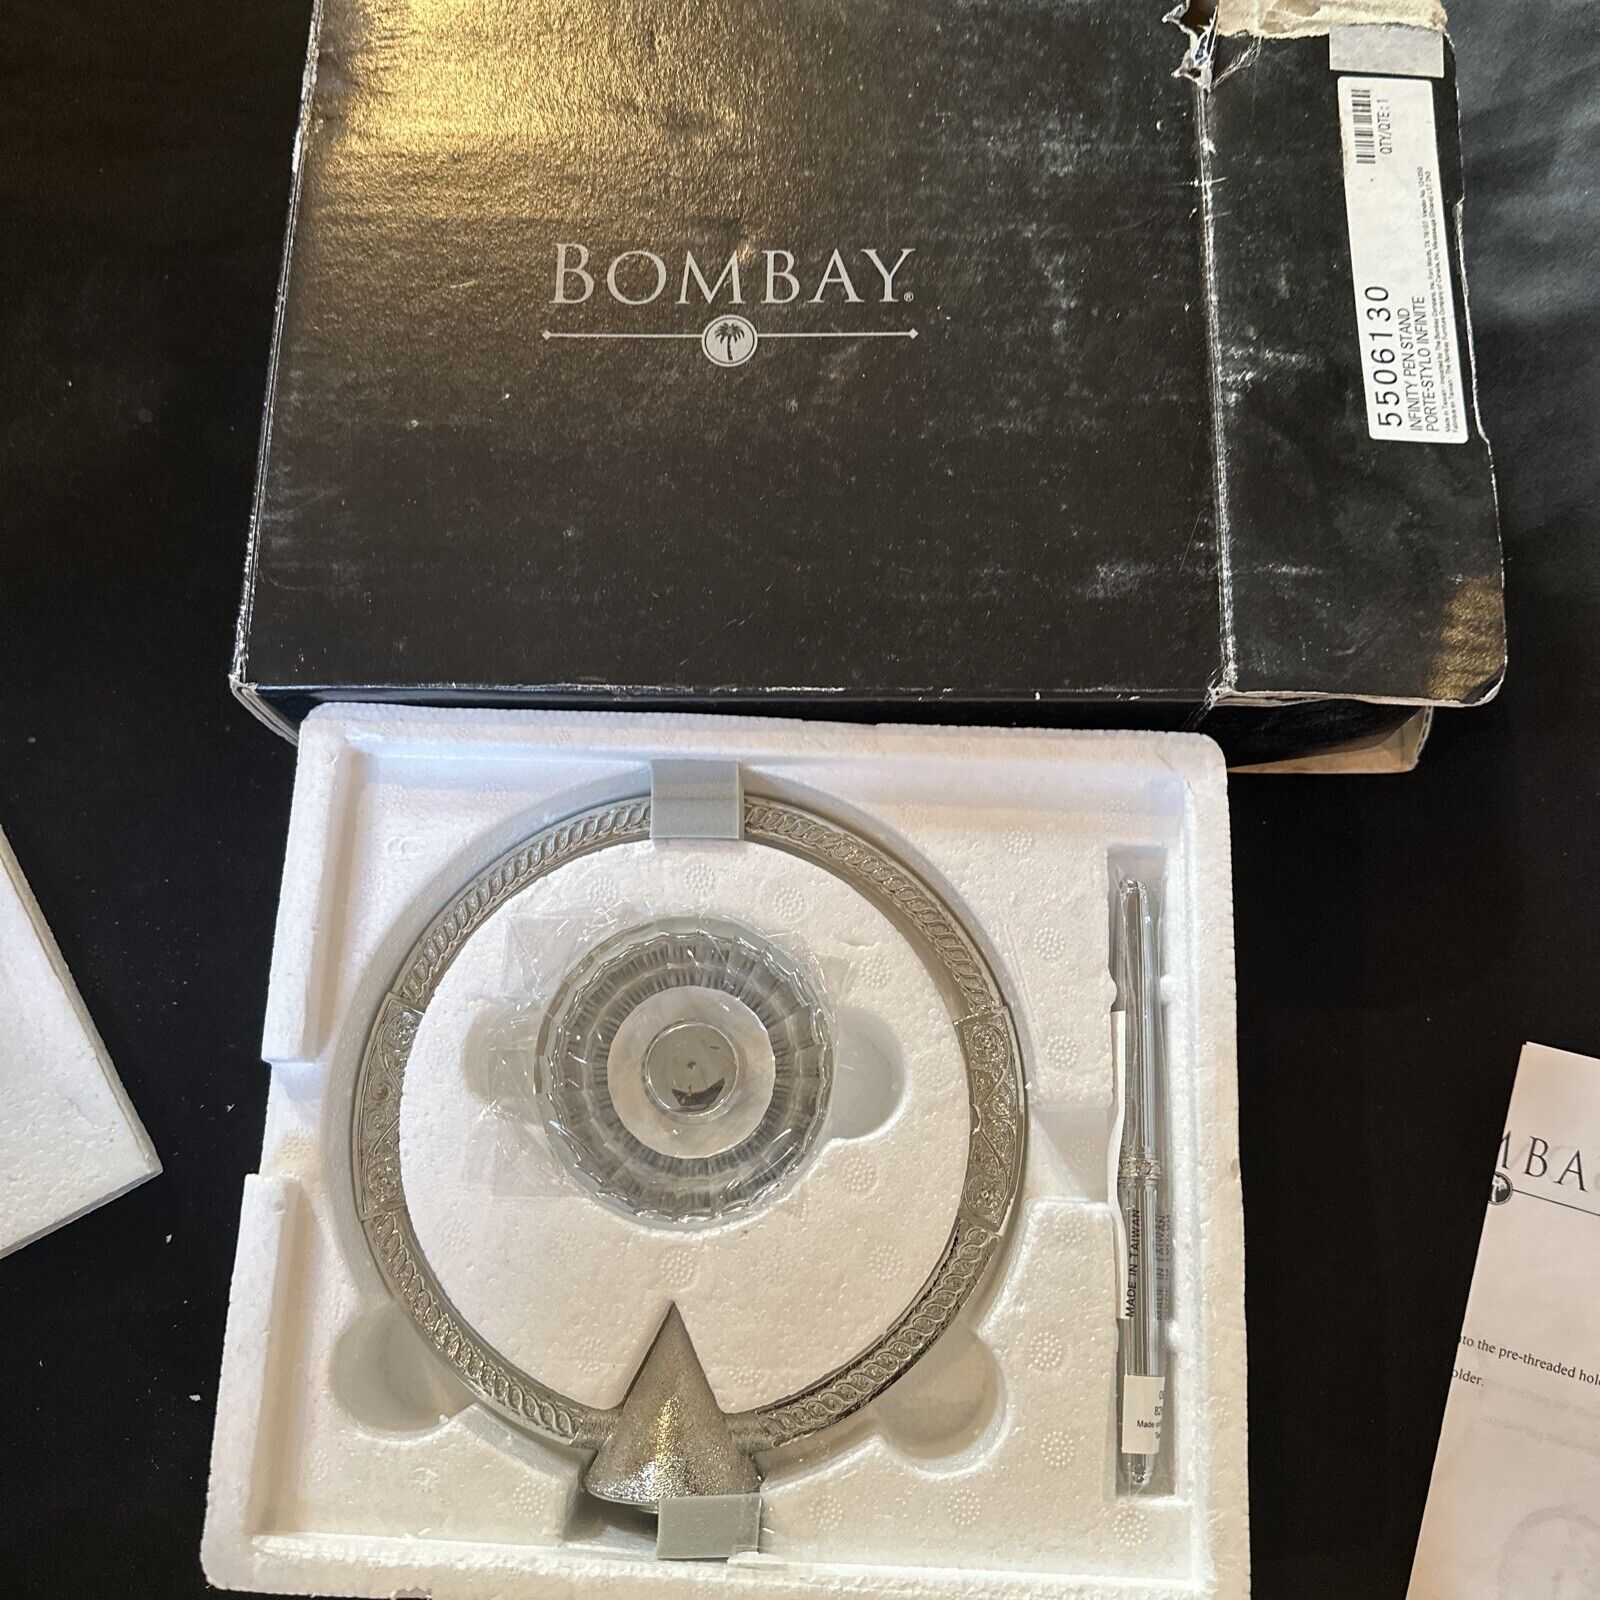 BOMBAY INFINITY PEN STAND AND PEN NIB 5506130. New In Damaged Box